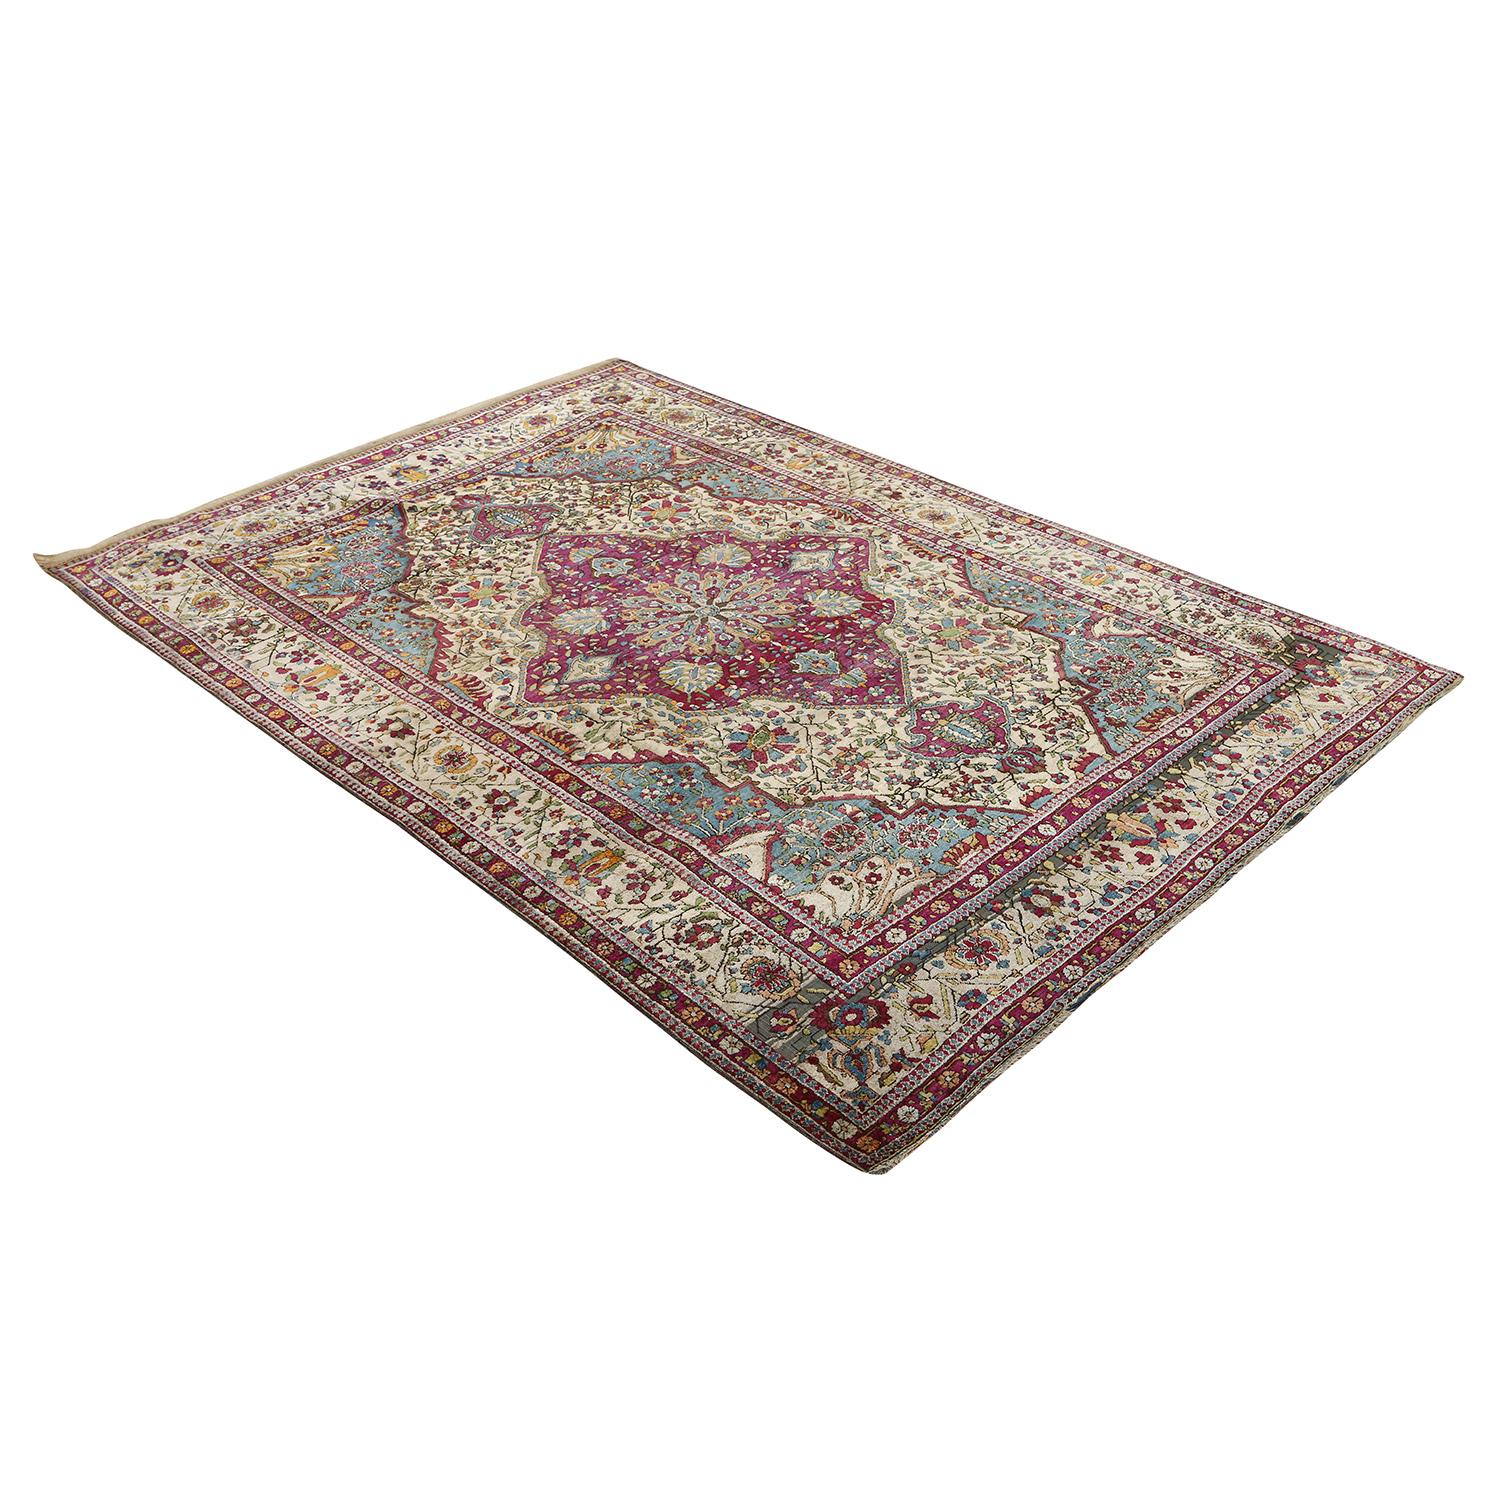 This Antique Kashan Mohtasham Rug is an exquisite masterpiece that combines the artistry of Persian craftsmanship with a captivating color palette. Its Center Medallion Design, adorned with shades of cherry, teal, and creams, weaves together a